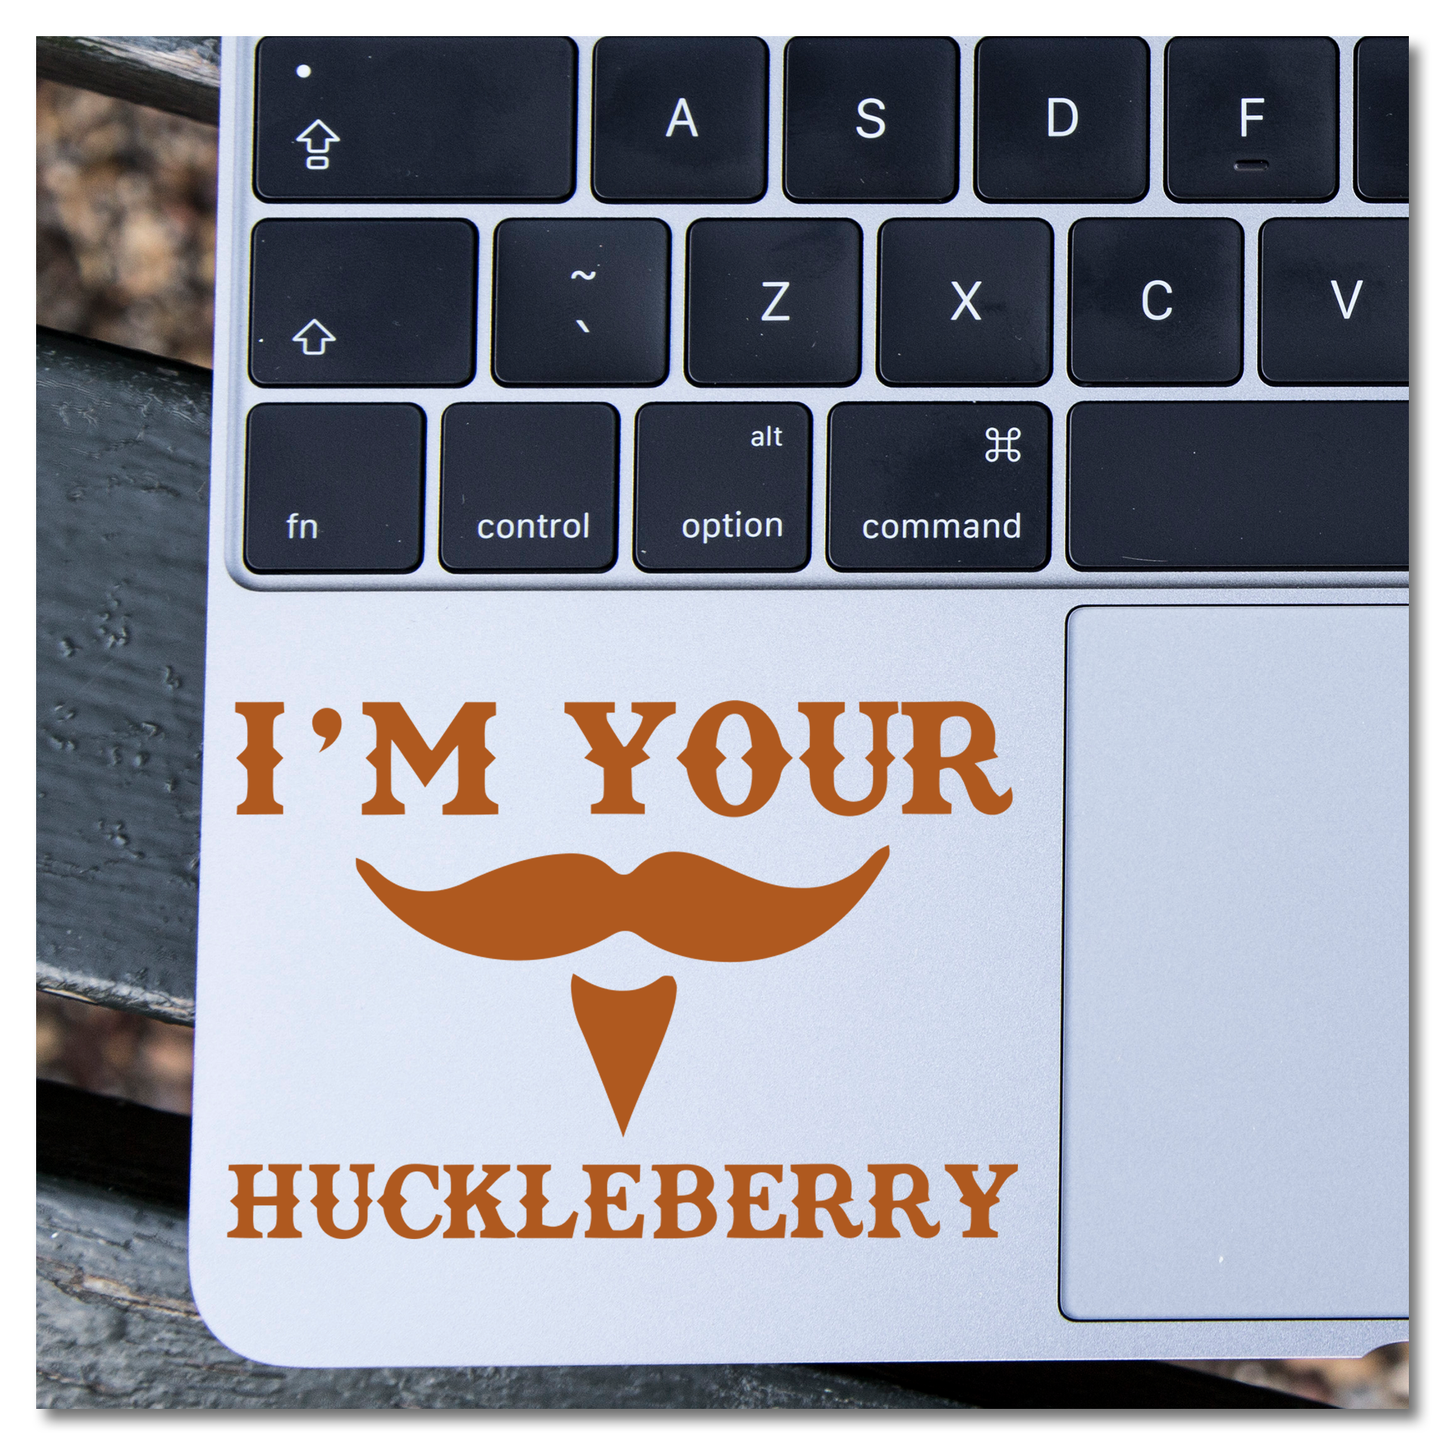 I'm Your Huckleberry Doc Holliday Tombstone Vinyl Decal Sticker